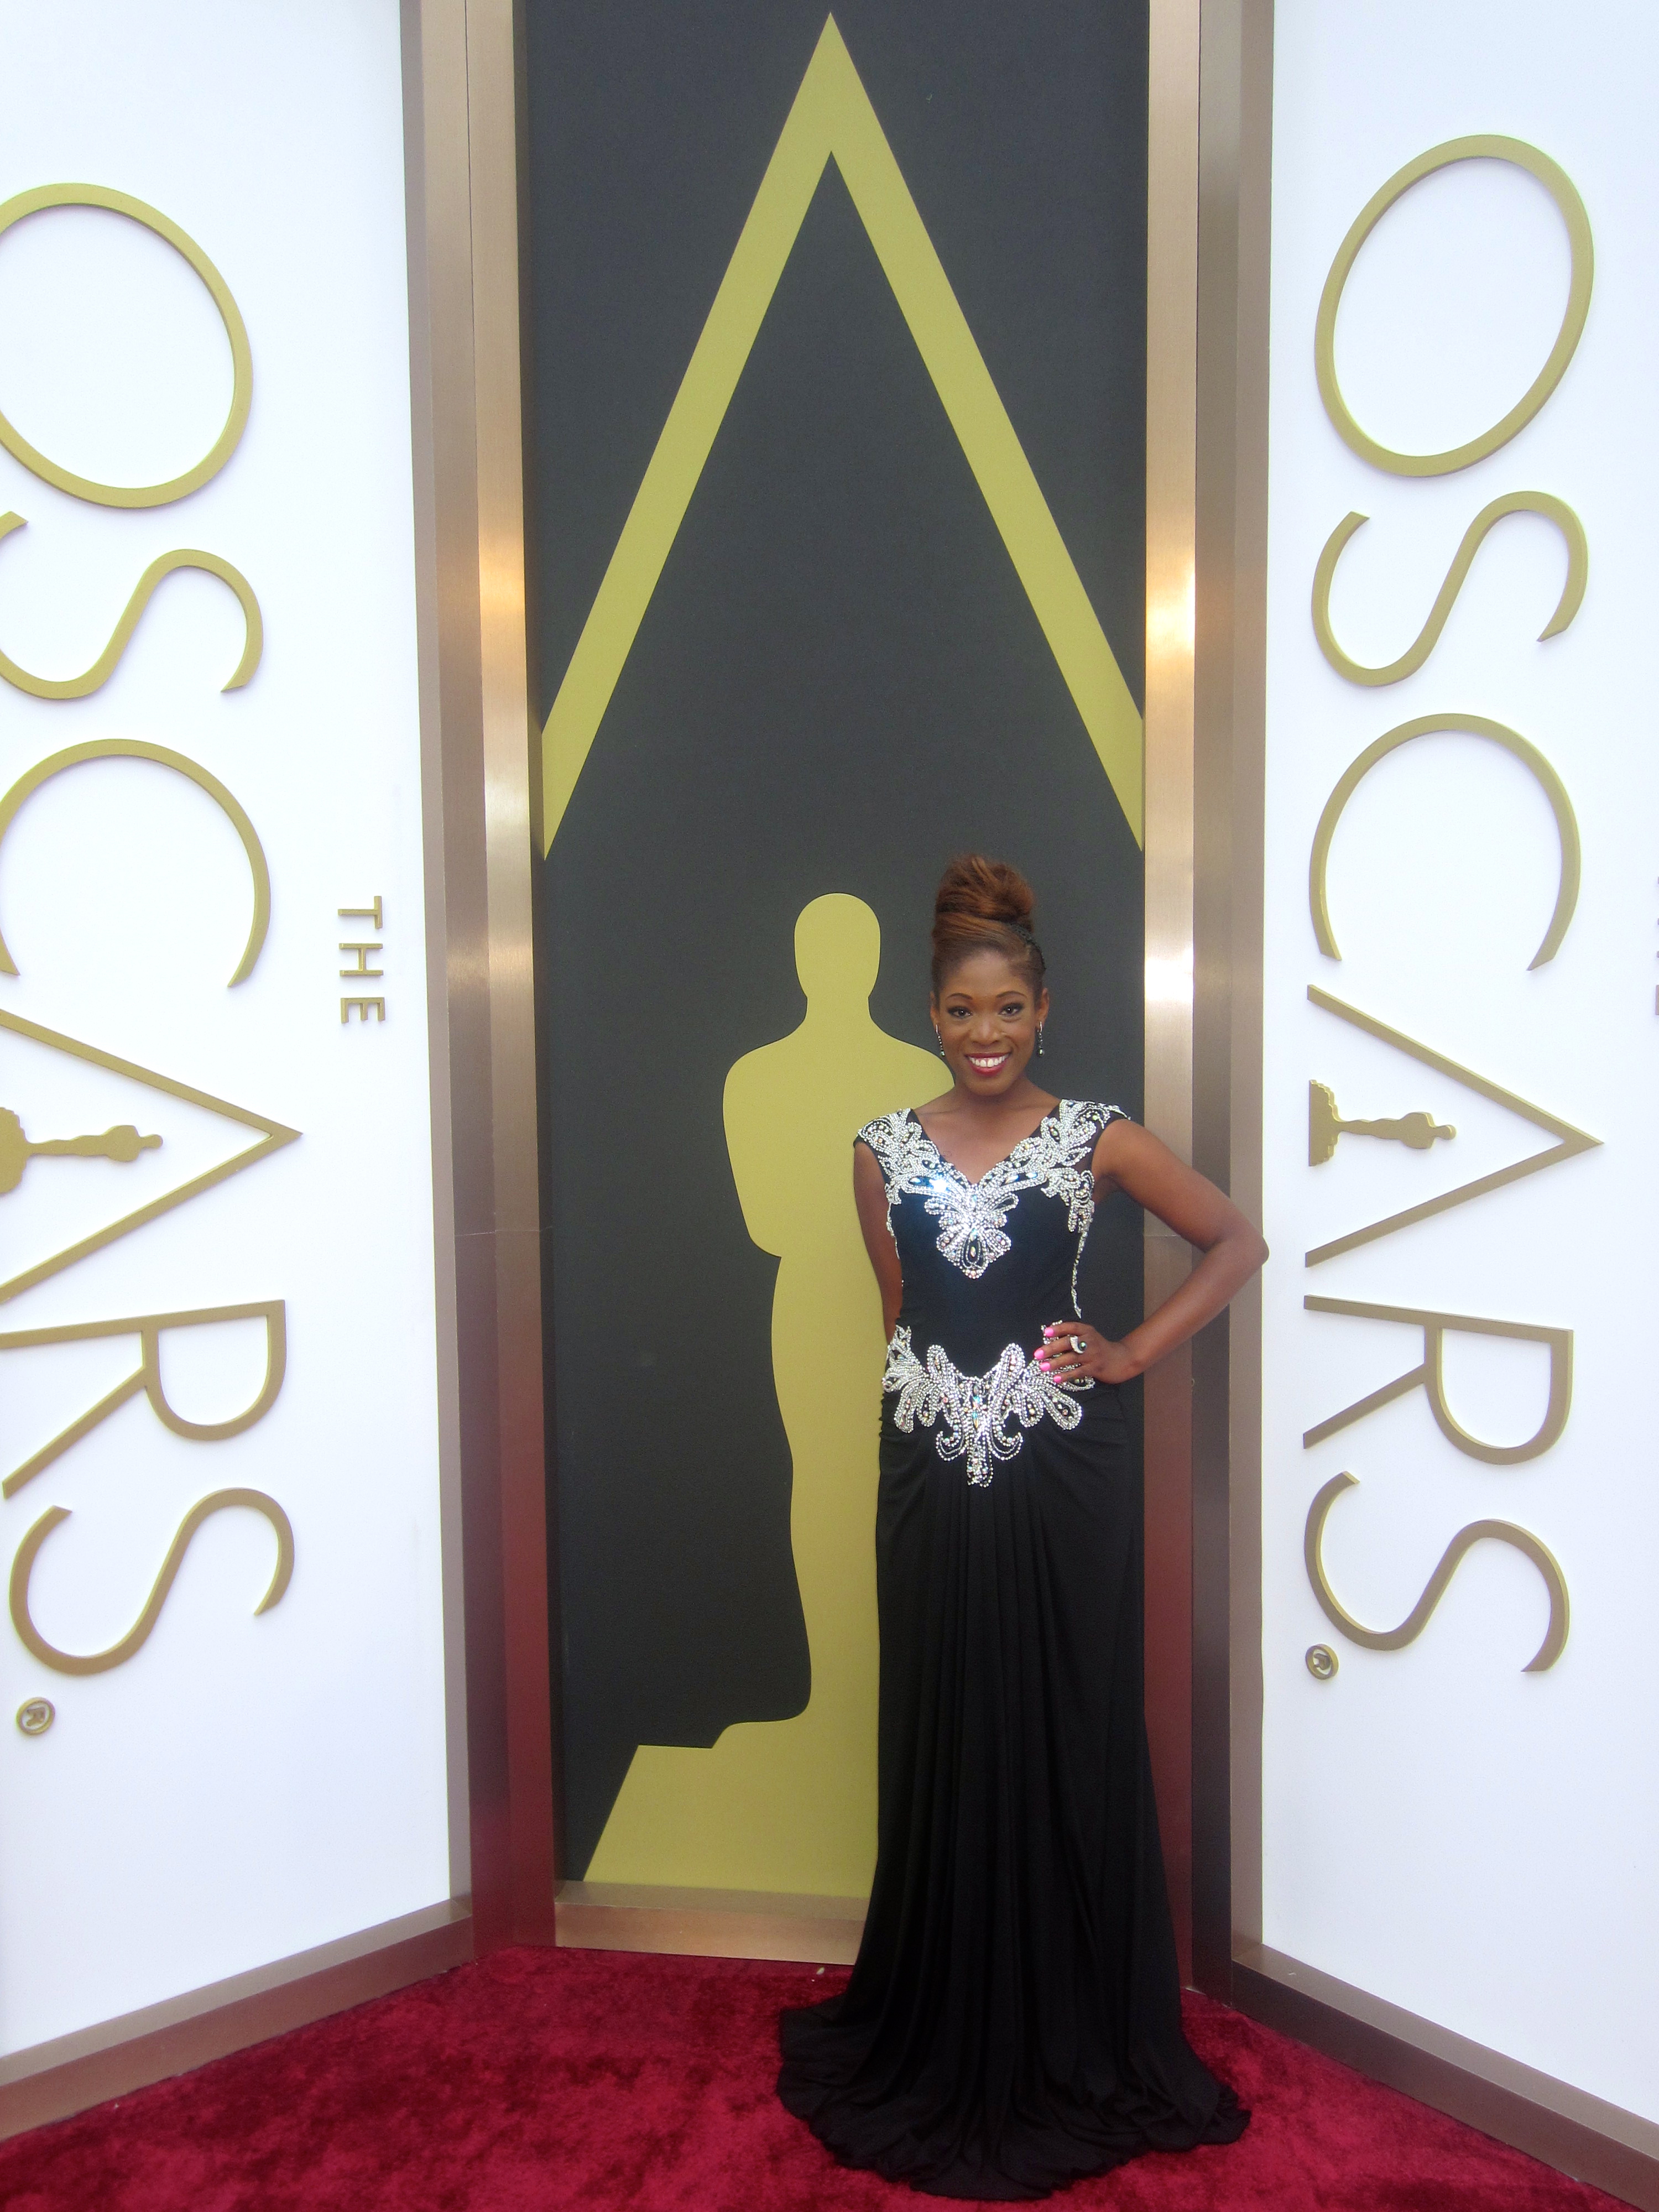 Host Tysha Williams of Studio 3 Hollywood LIVE at the 56th Annual Academy Awards Red Carpet Arrivals. In designer Shekhar Rehate gown and American Gem Company jewelry